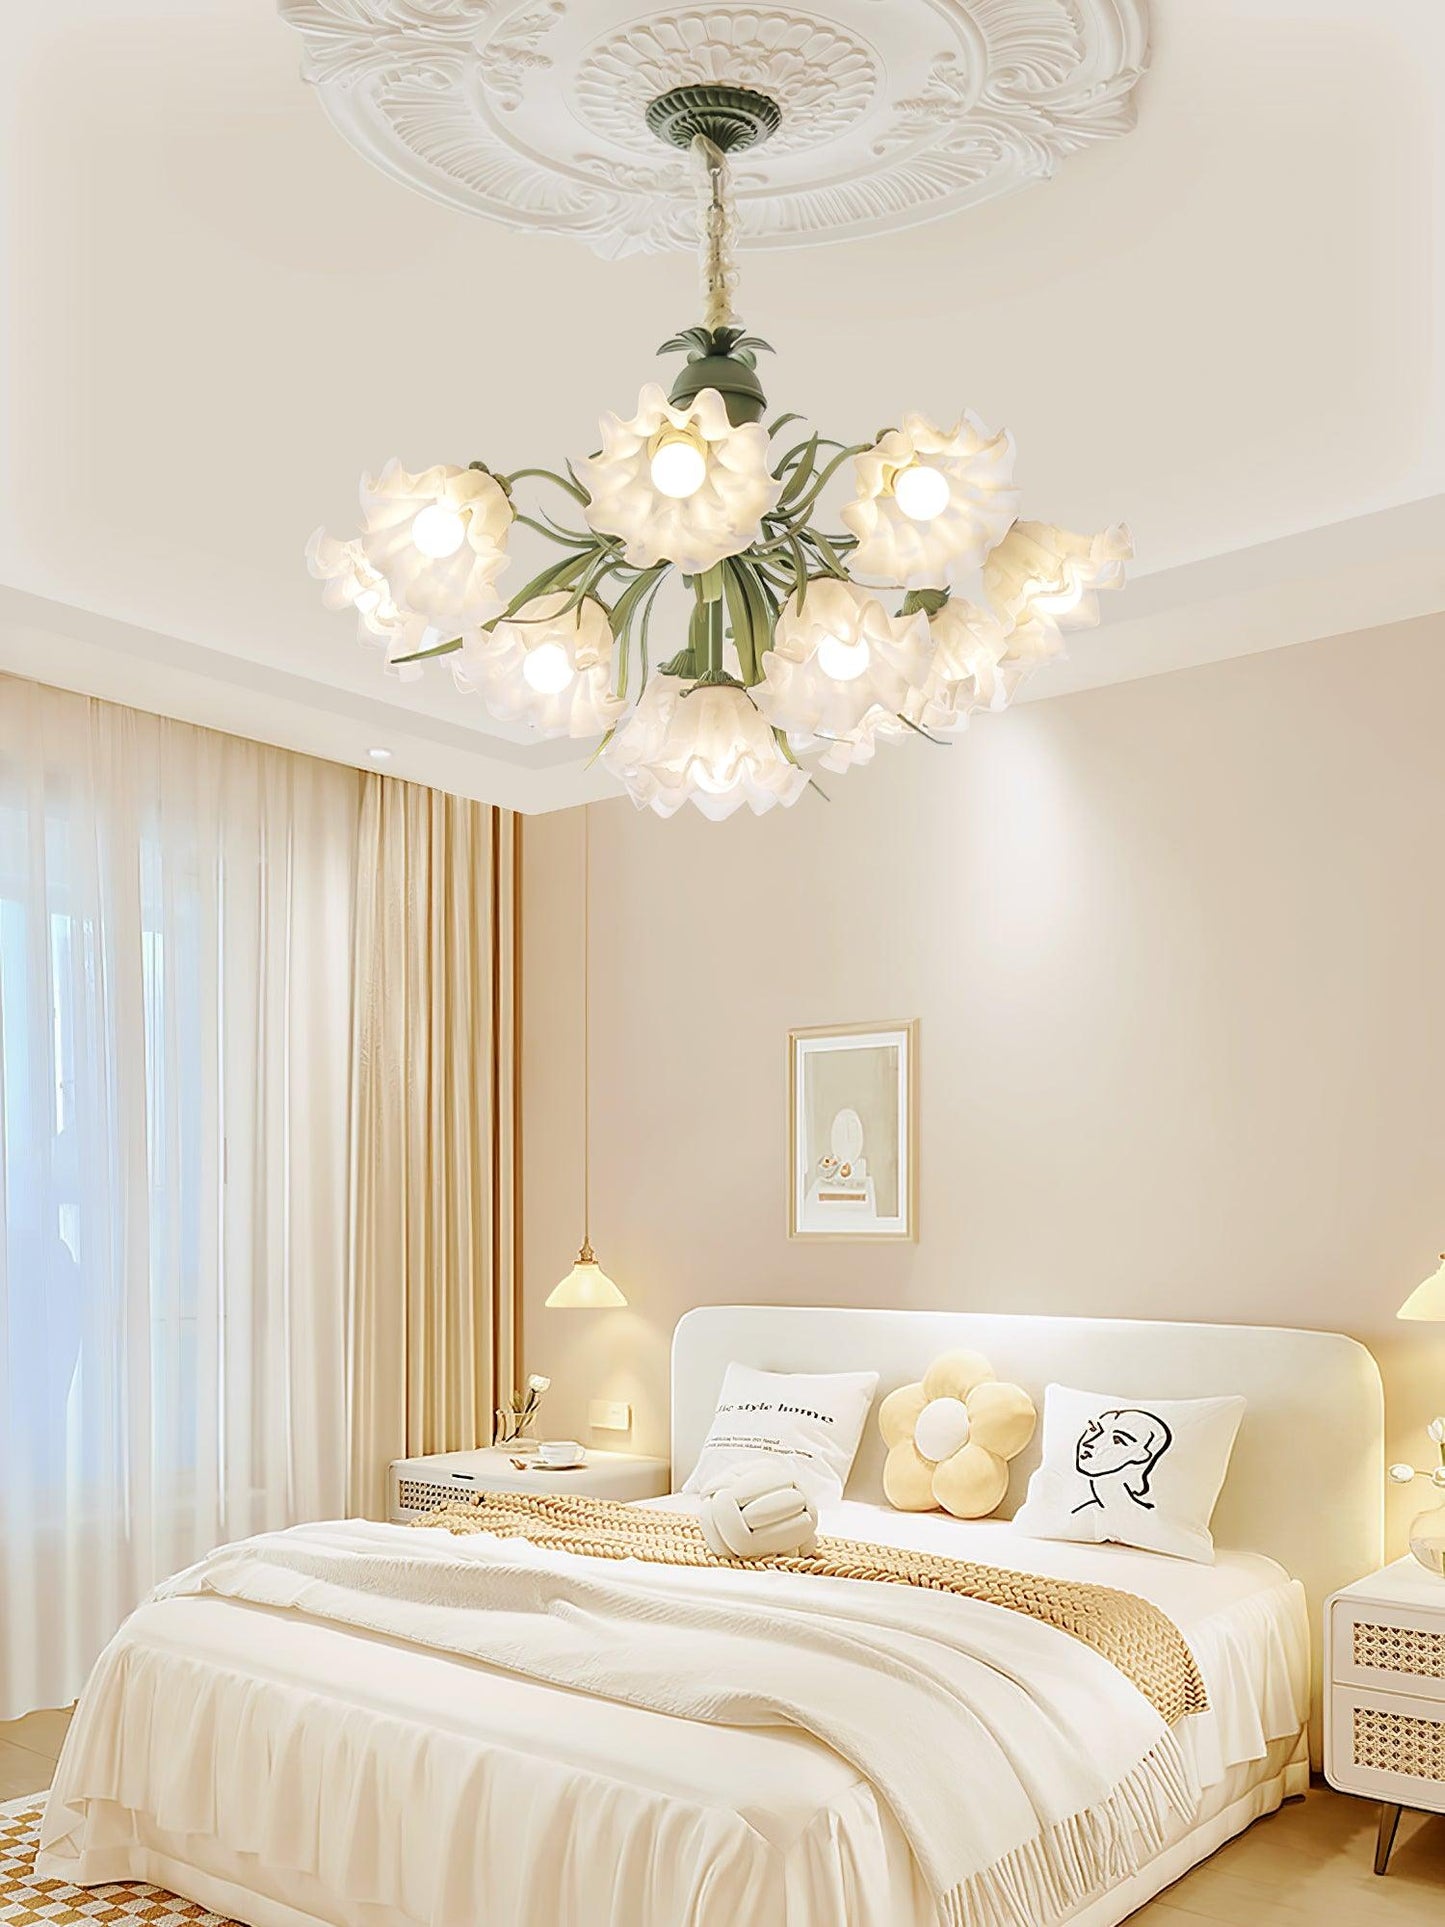 Lily of the Valley Flower Chandelier